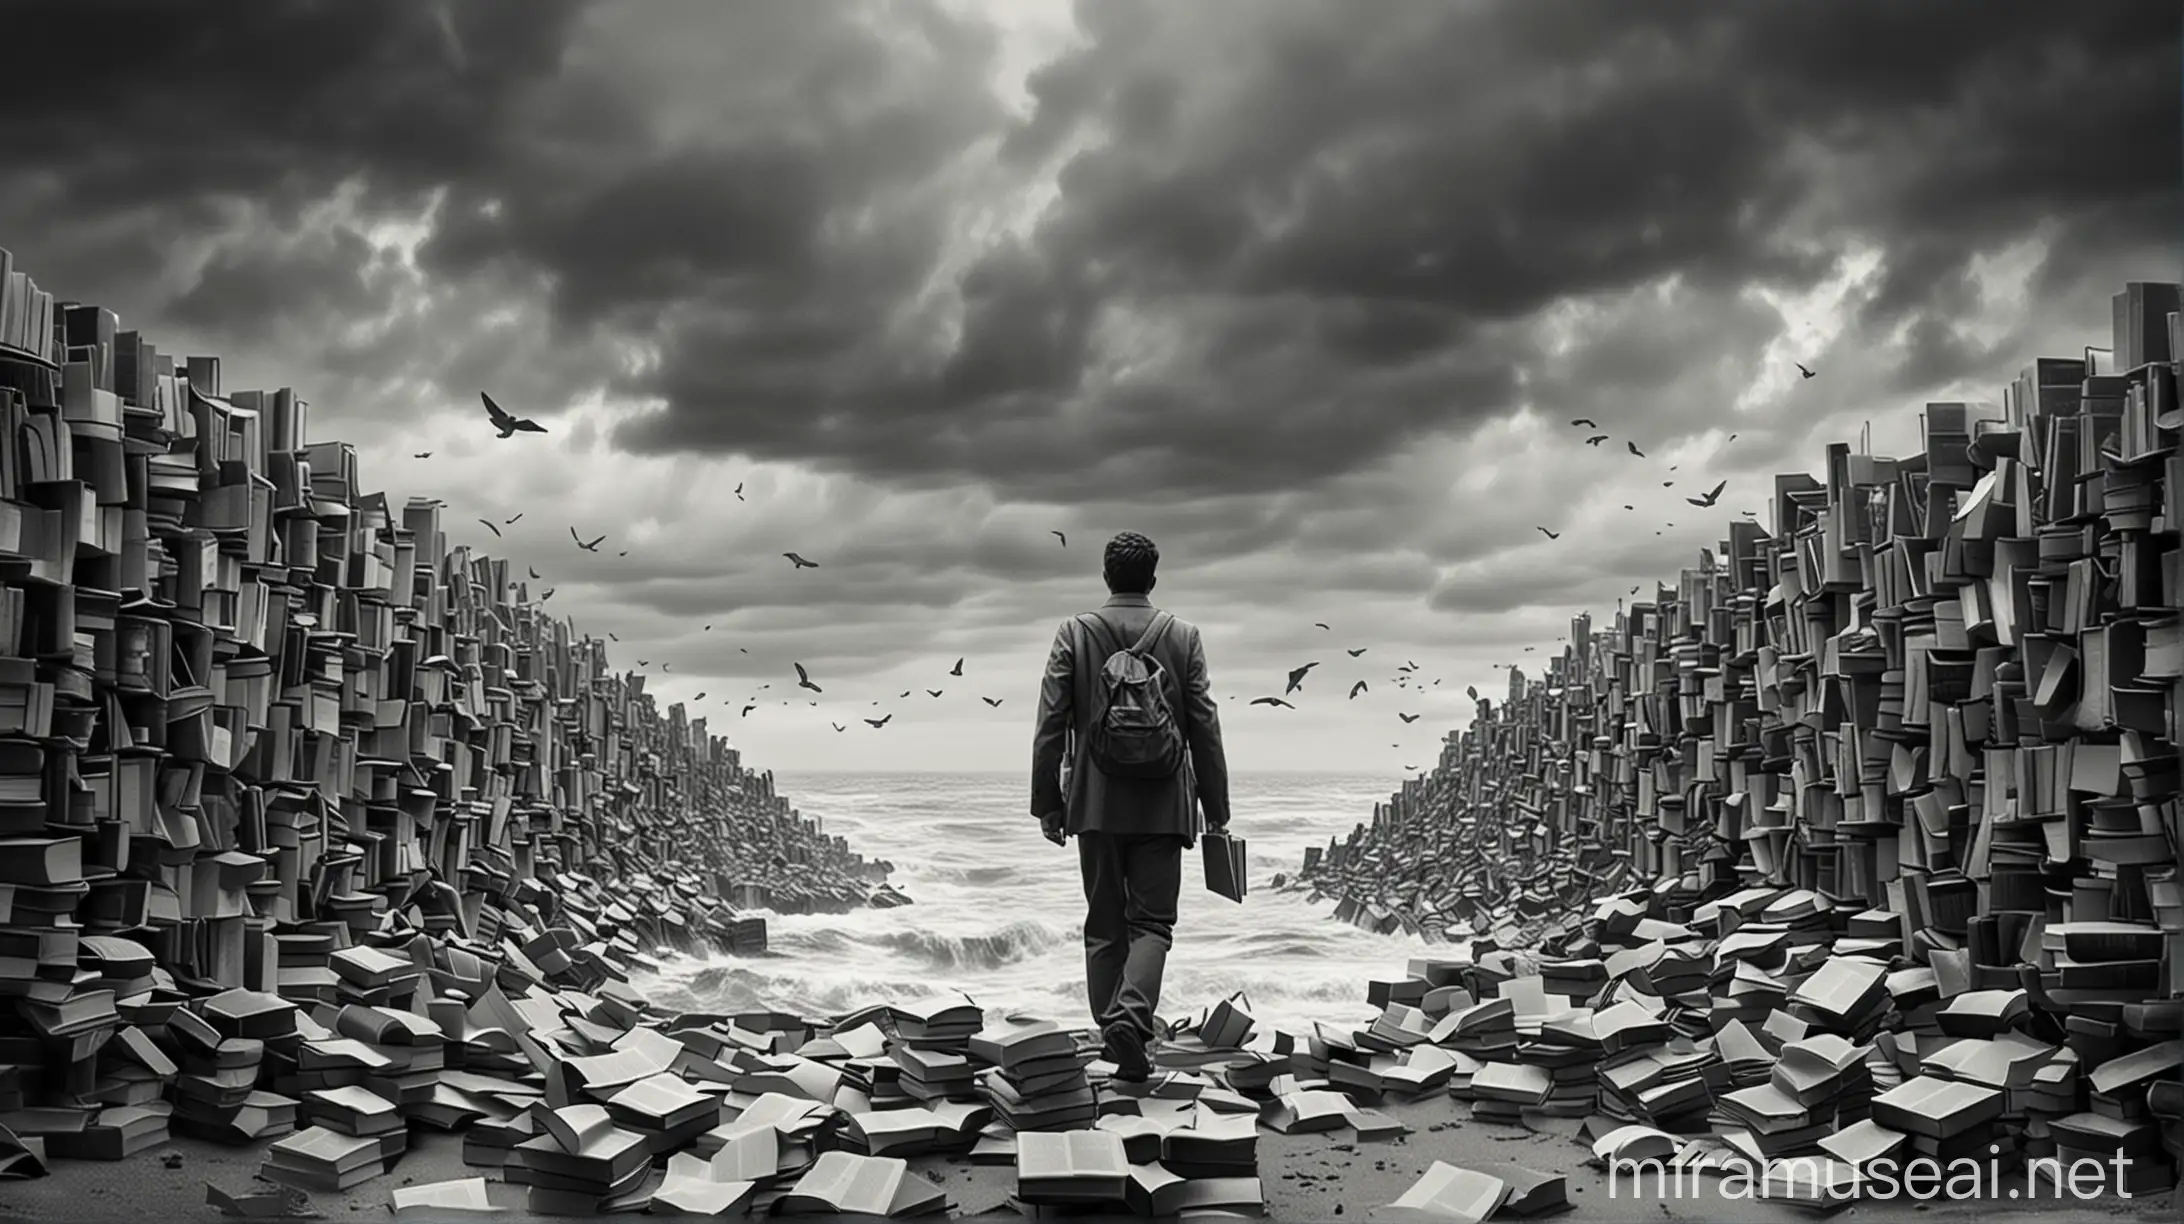 Roaming in the ocean of books and knowledge, dominated by gray tones